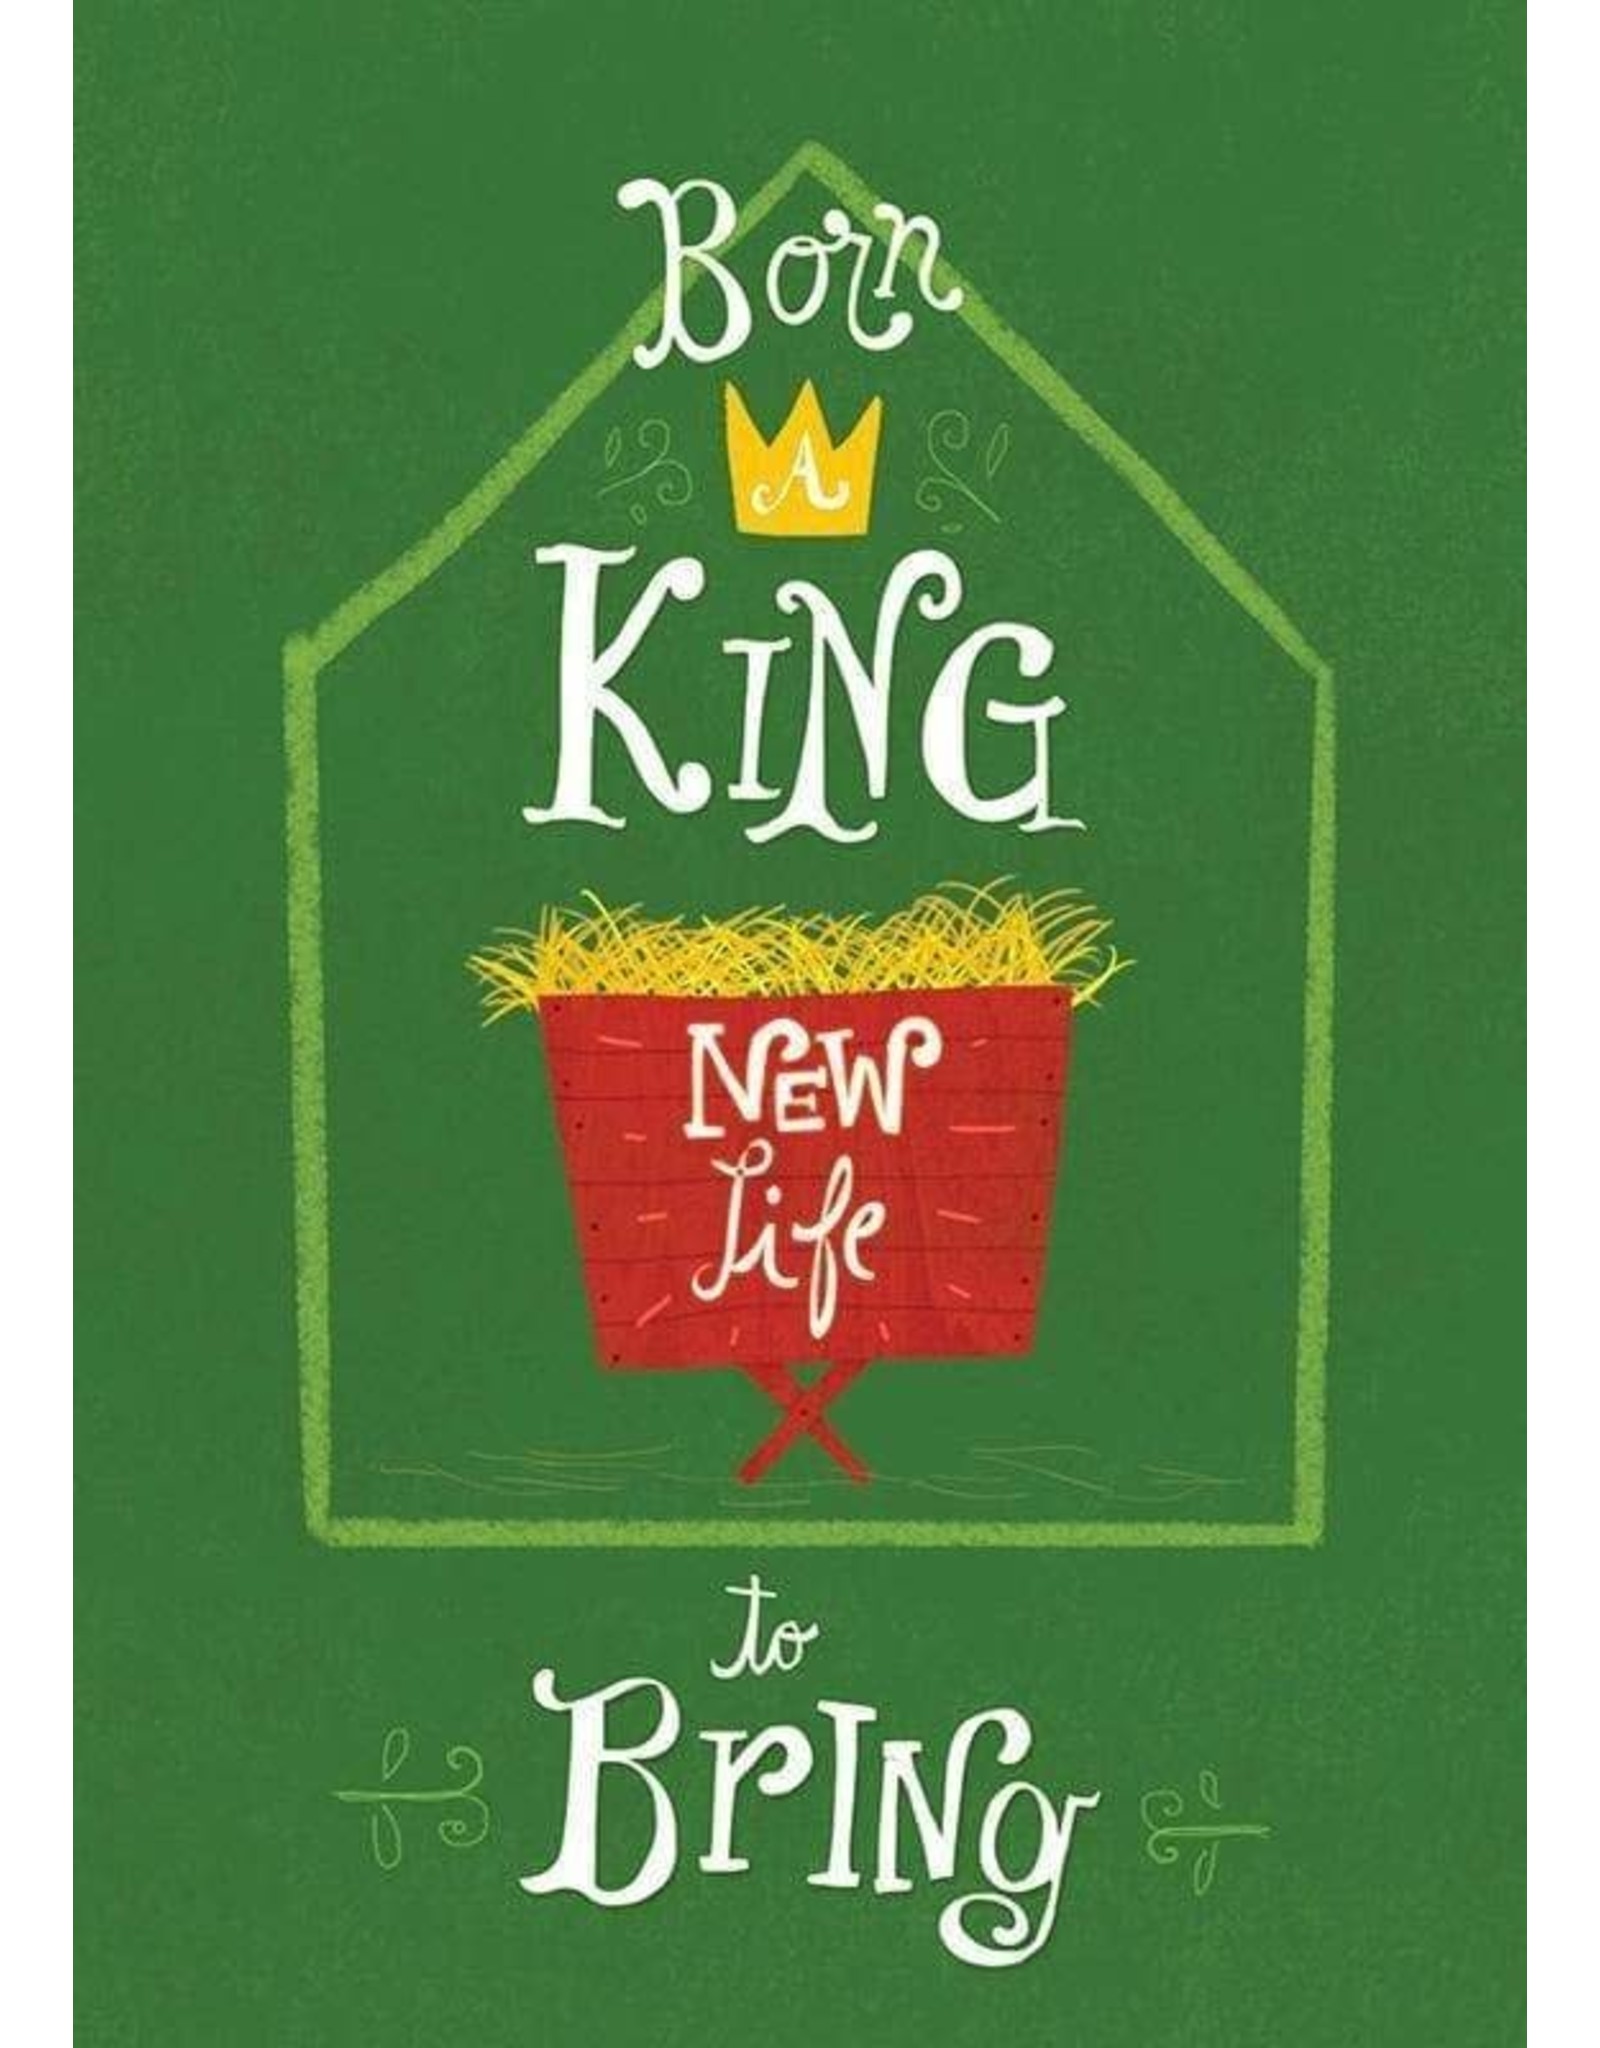 Born a King New Life to Bring Christmas Card